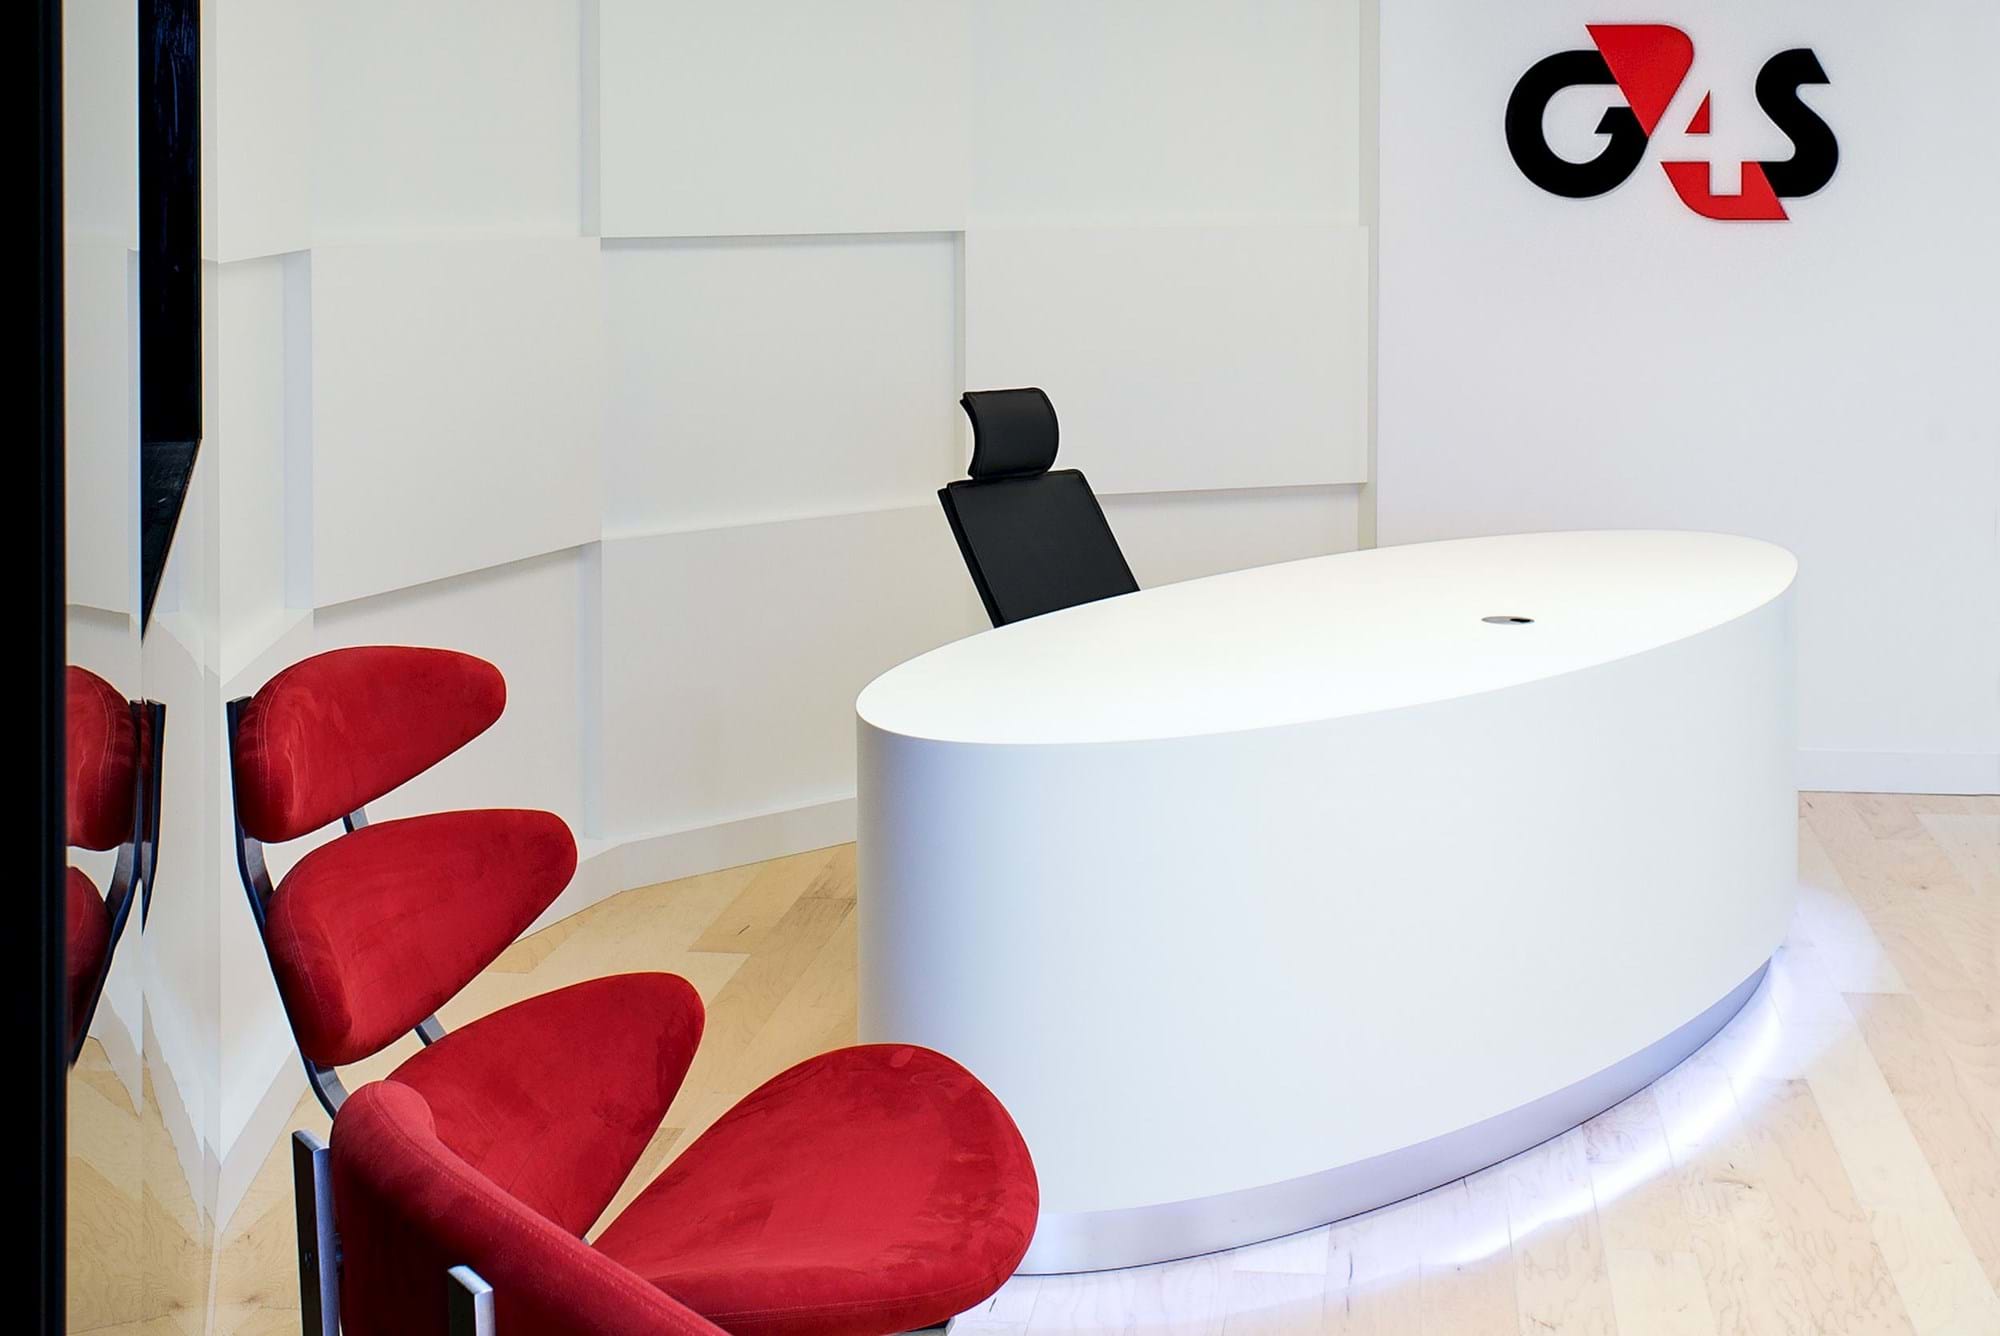 Modus Workspace office design, fit out and refurbishment - G4S - Reception - GS4_02_highres_jpg_sRGB.jpg